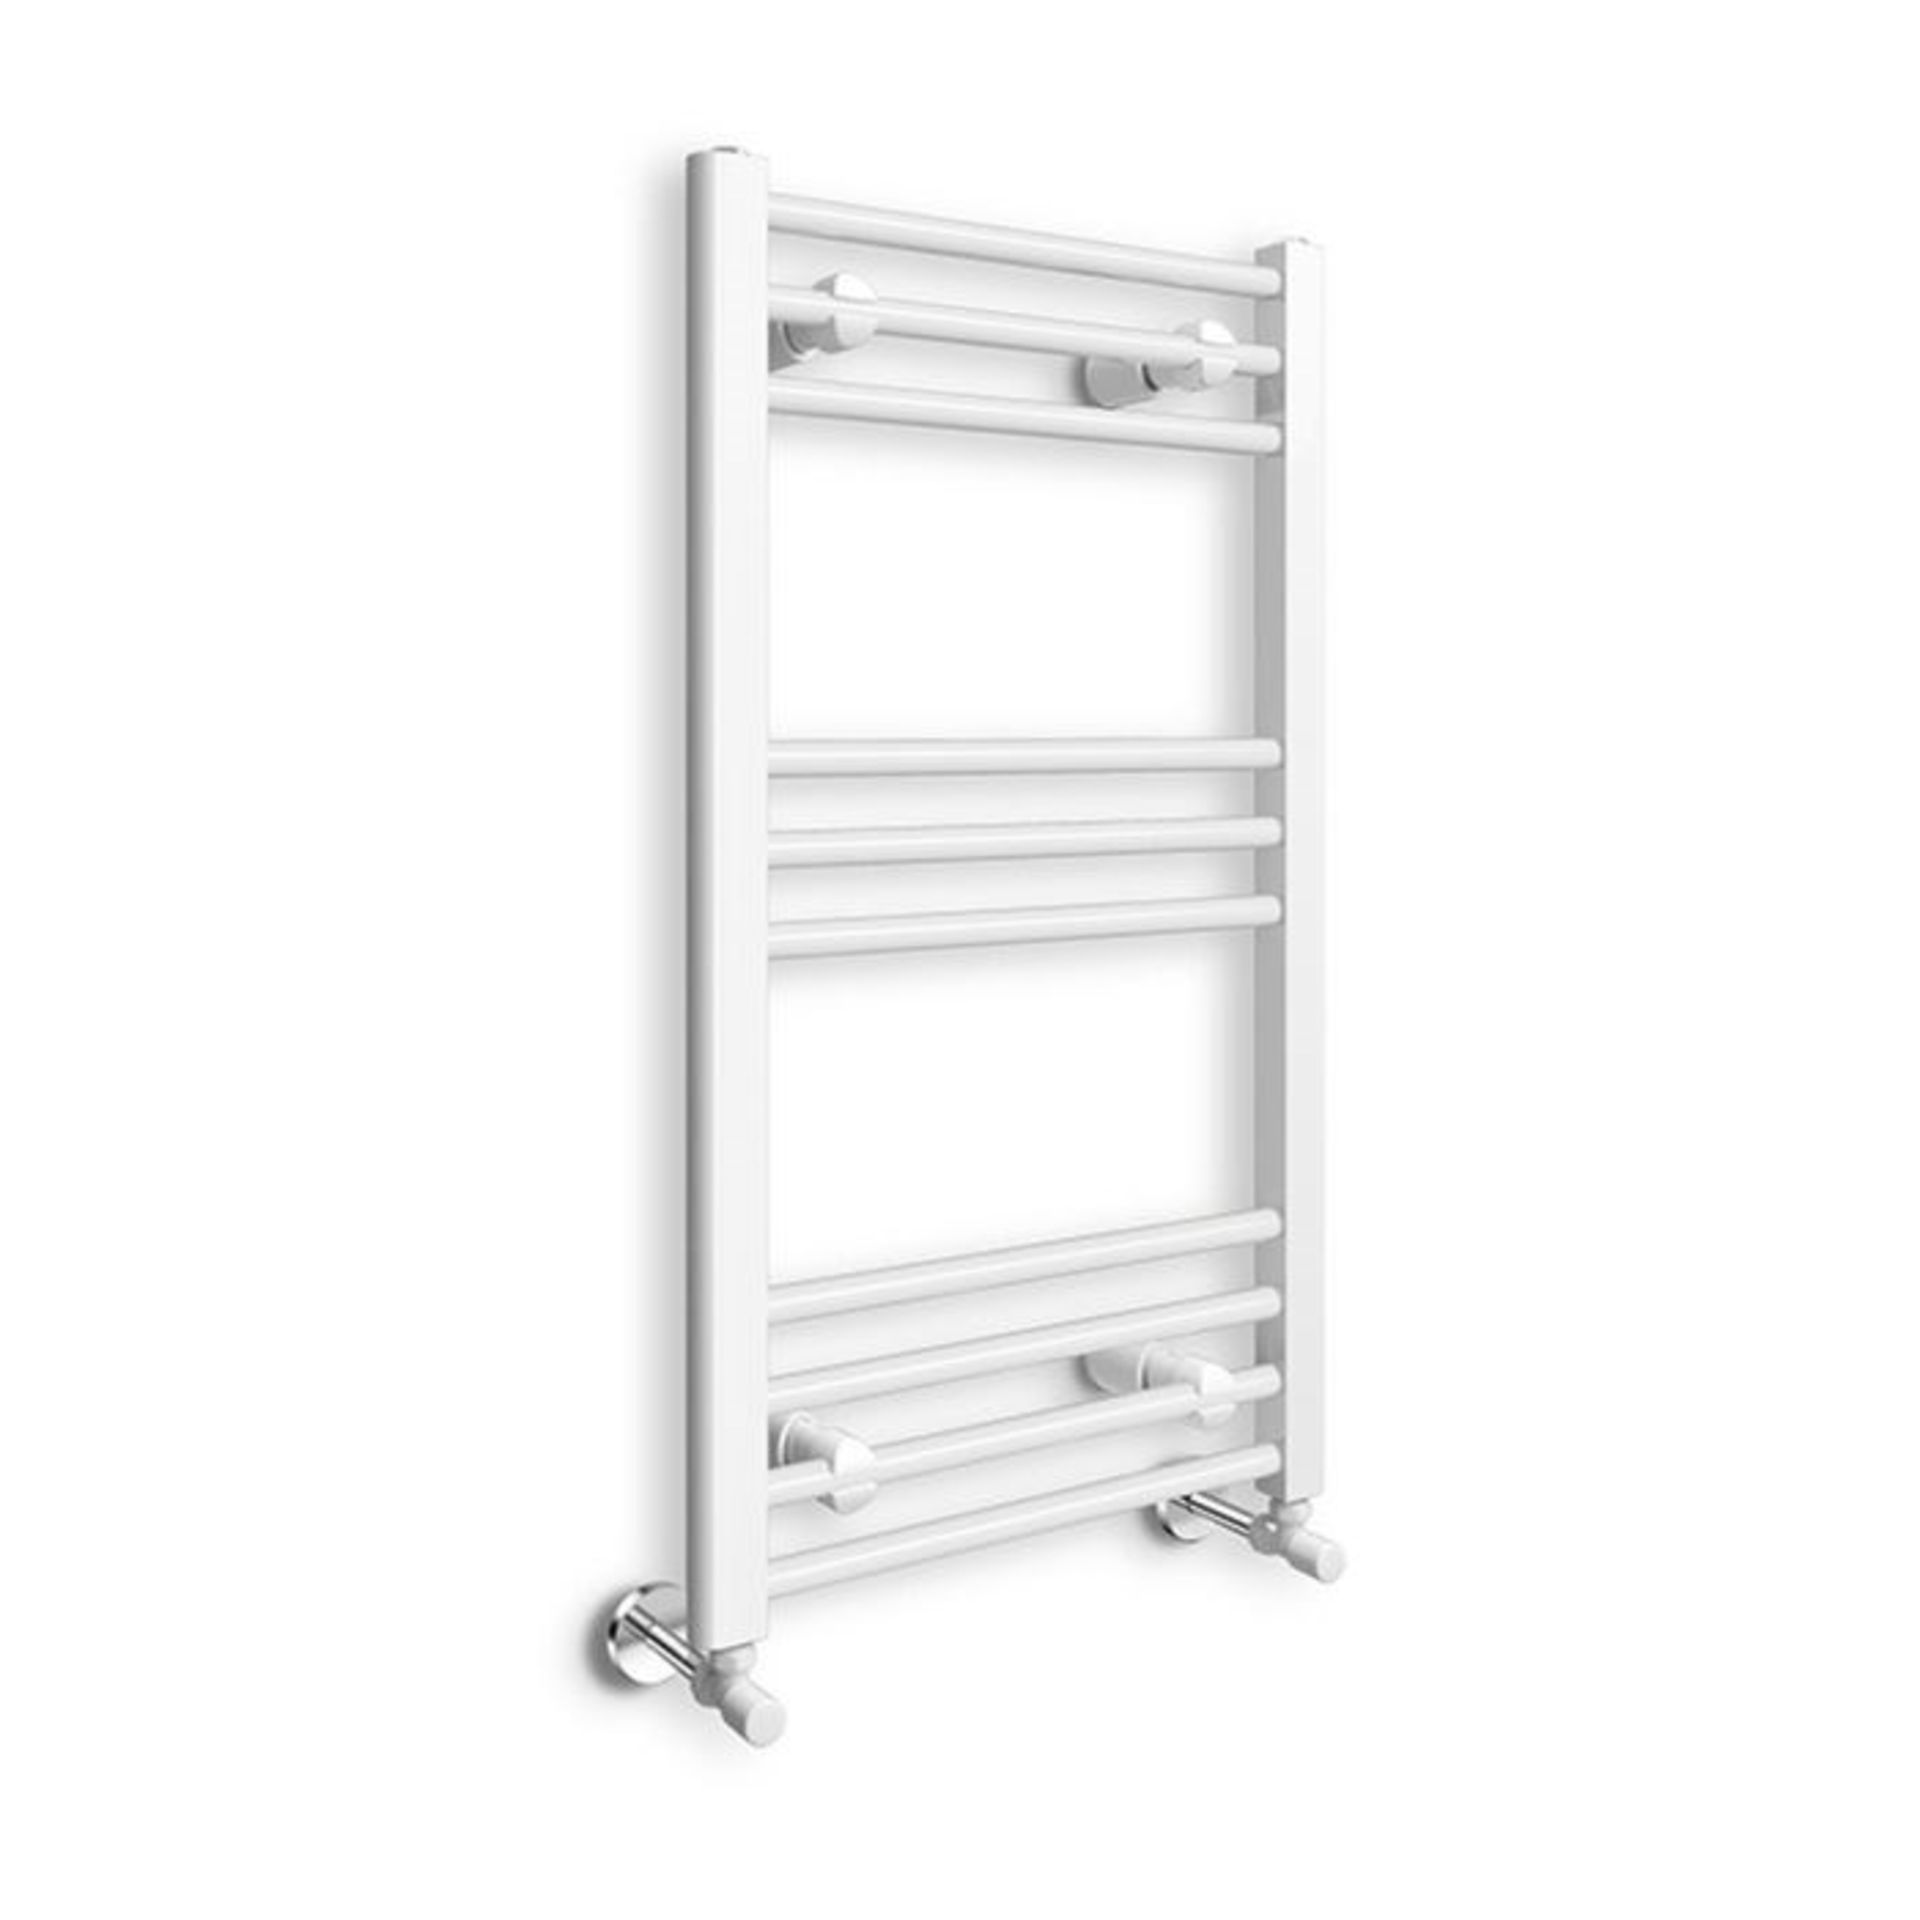 (HM54) 1200x500mm White Matt Heated Towel Radiator. Made from low carbon steel Finished with a...